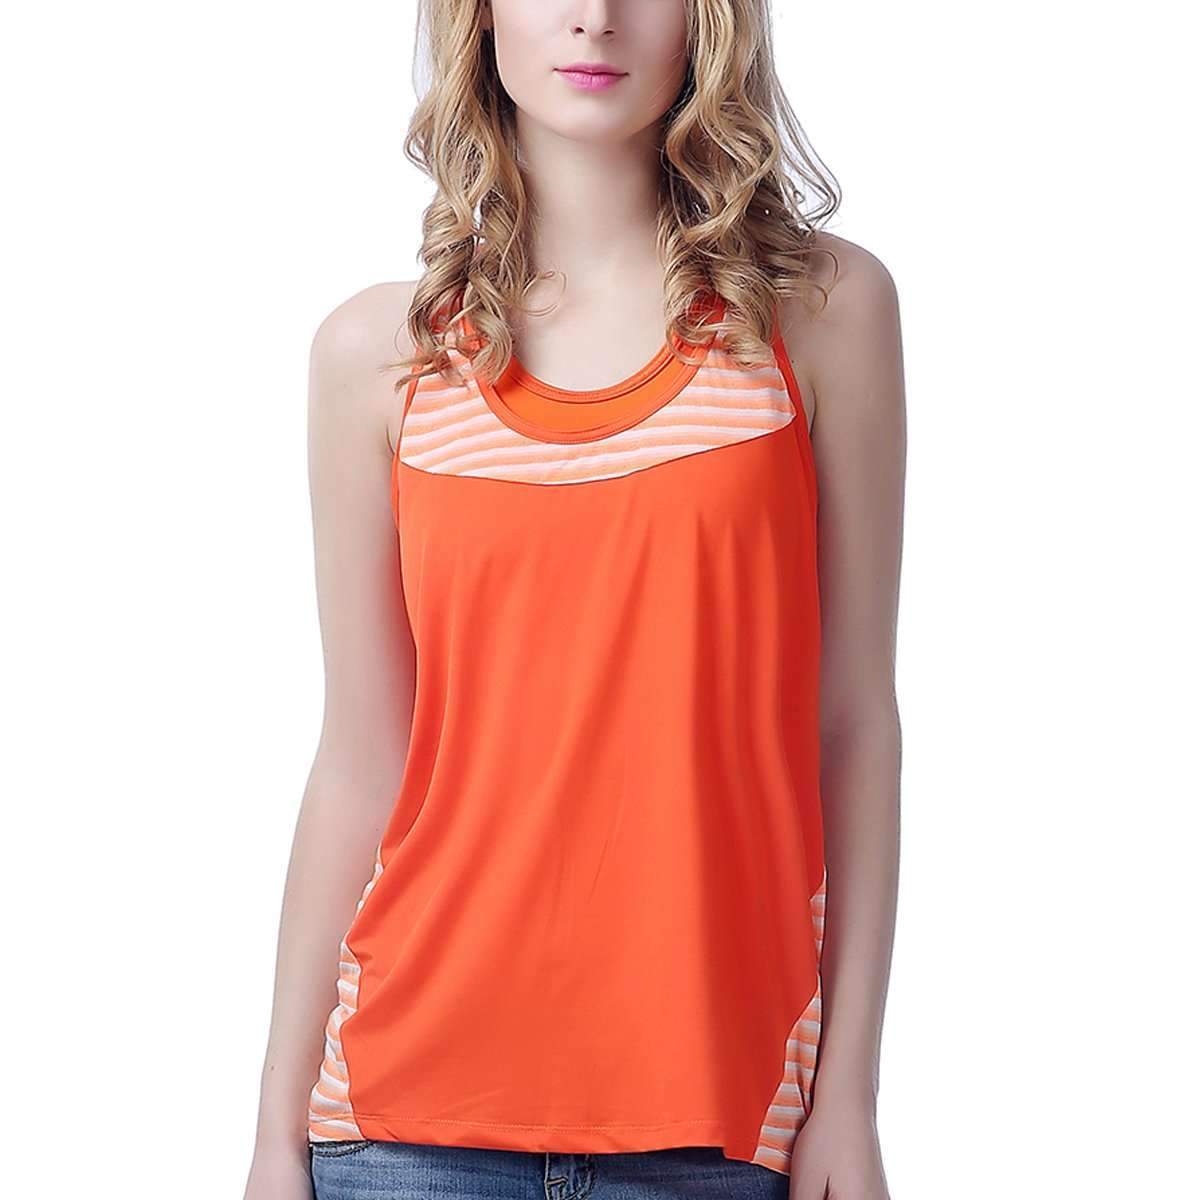 Mesh Tank Shirt,Activewear,Mad Style, by Mad Style